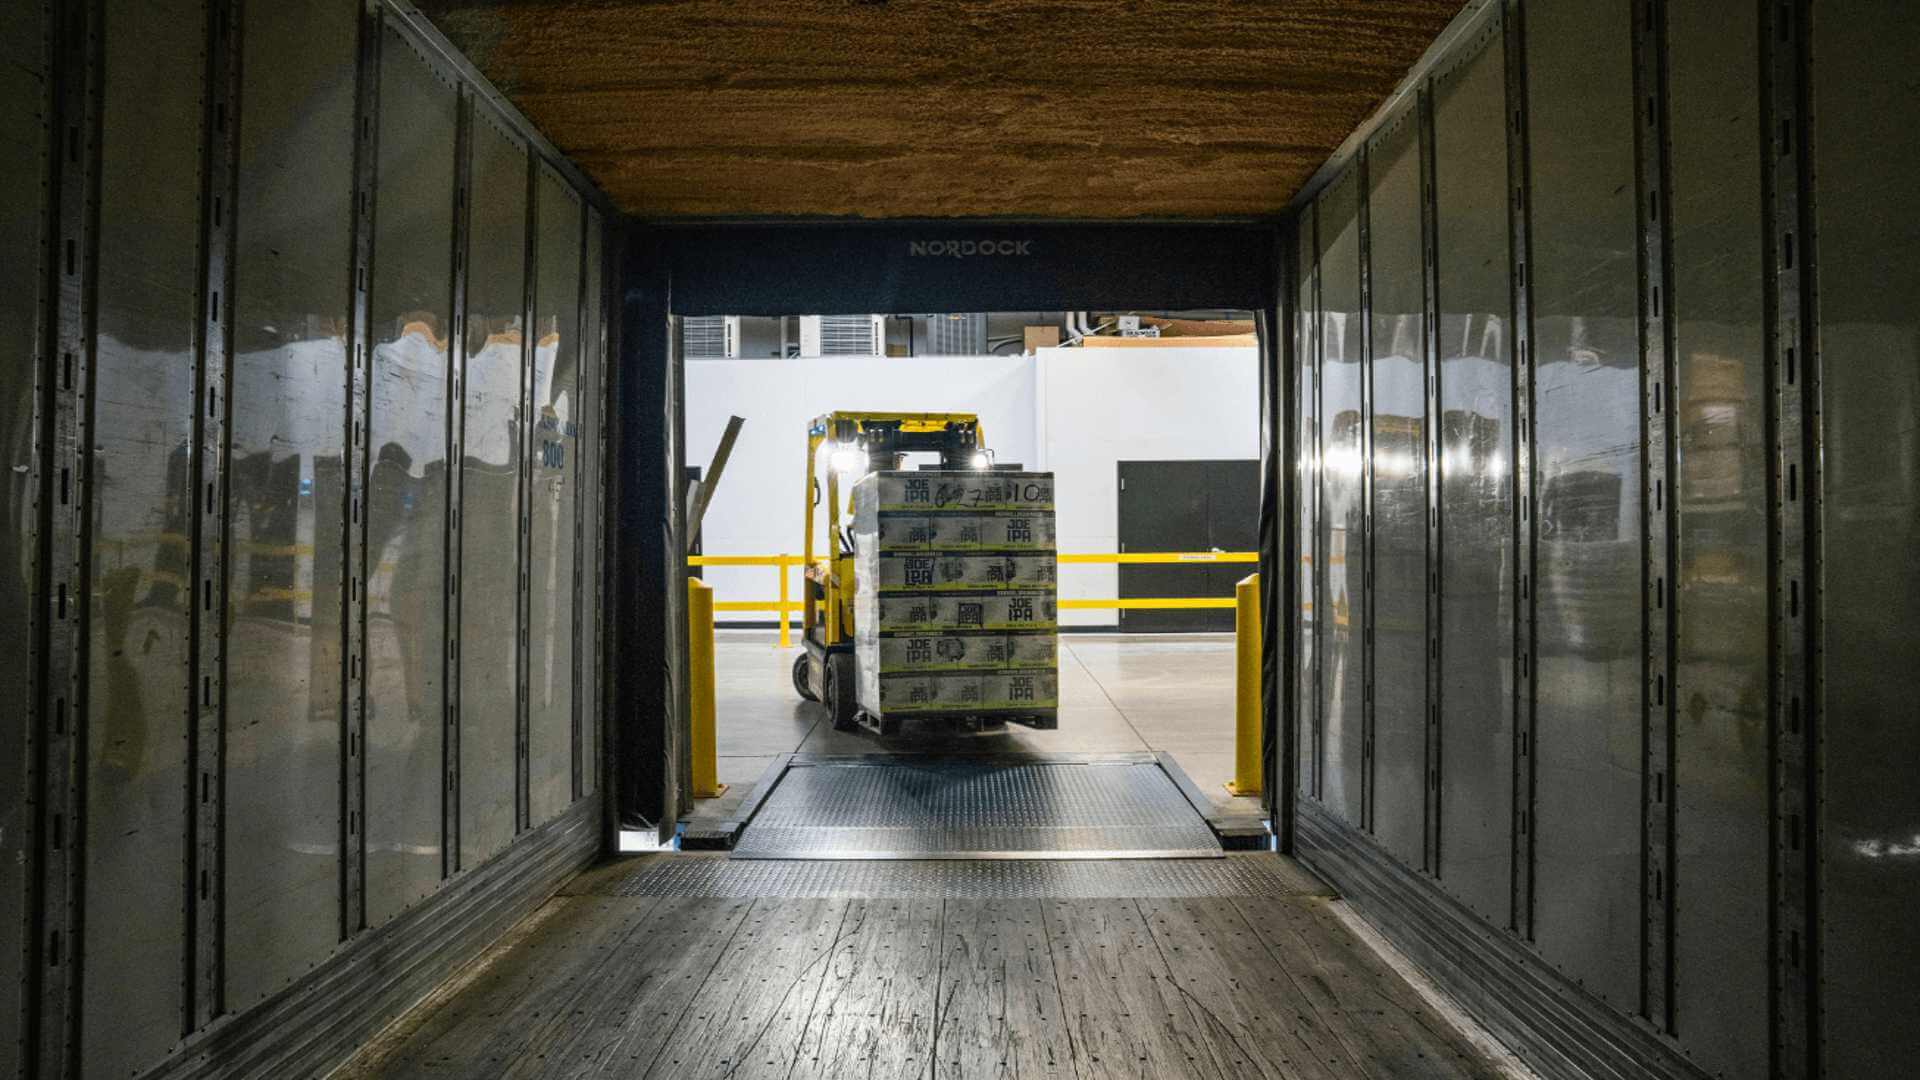 WOULD YOU ENTRUST THE FORKLIFT TO A BLINDFOLDED OPERATOR?